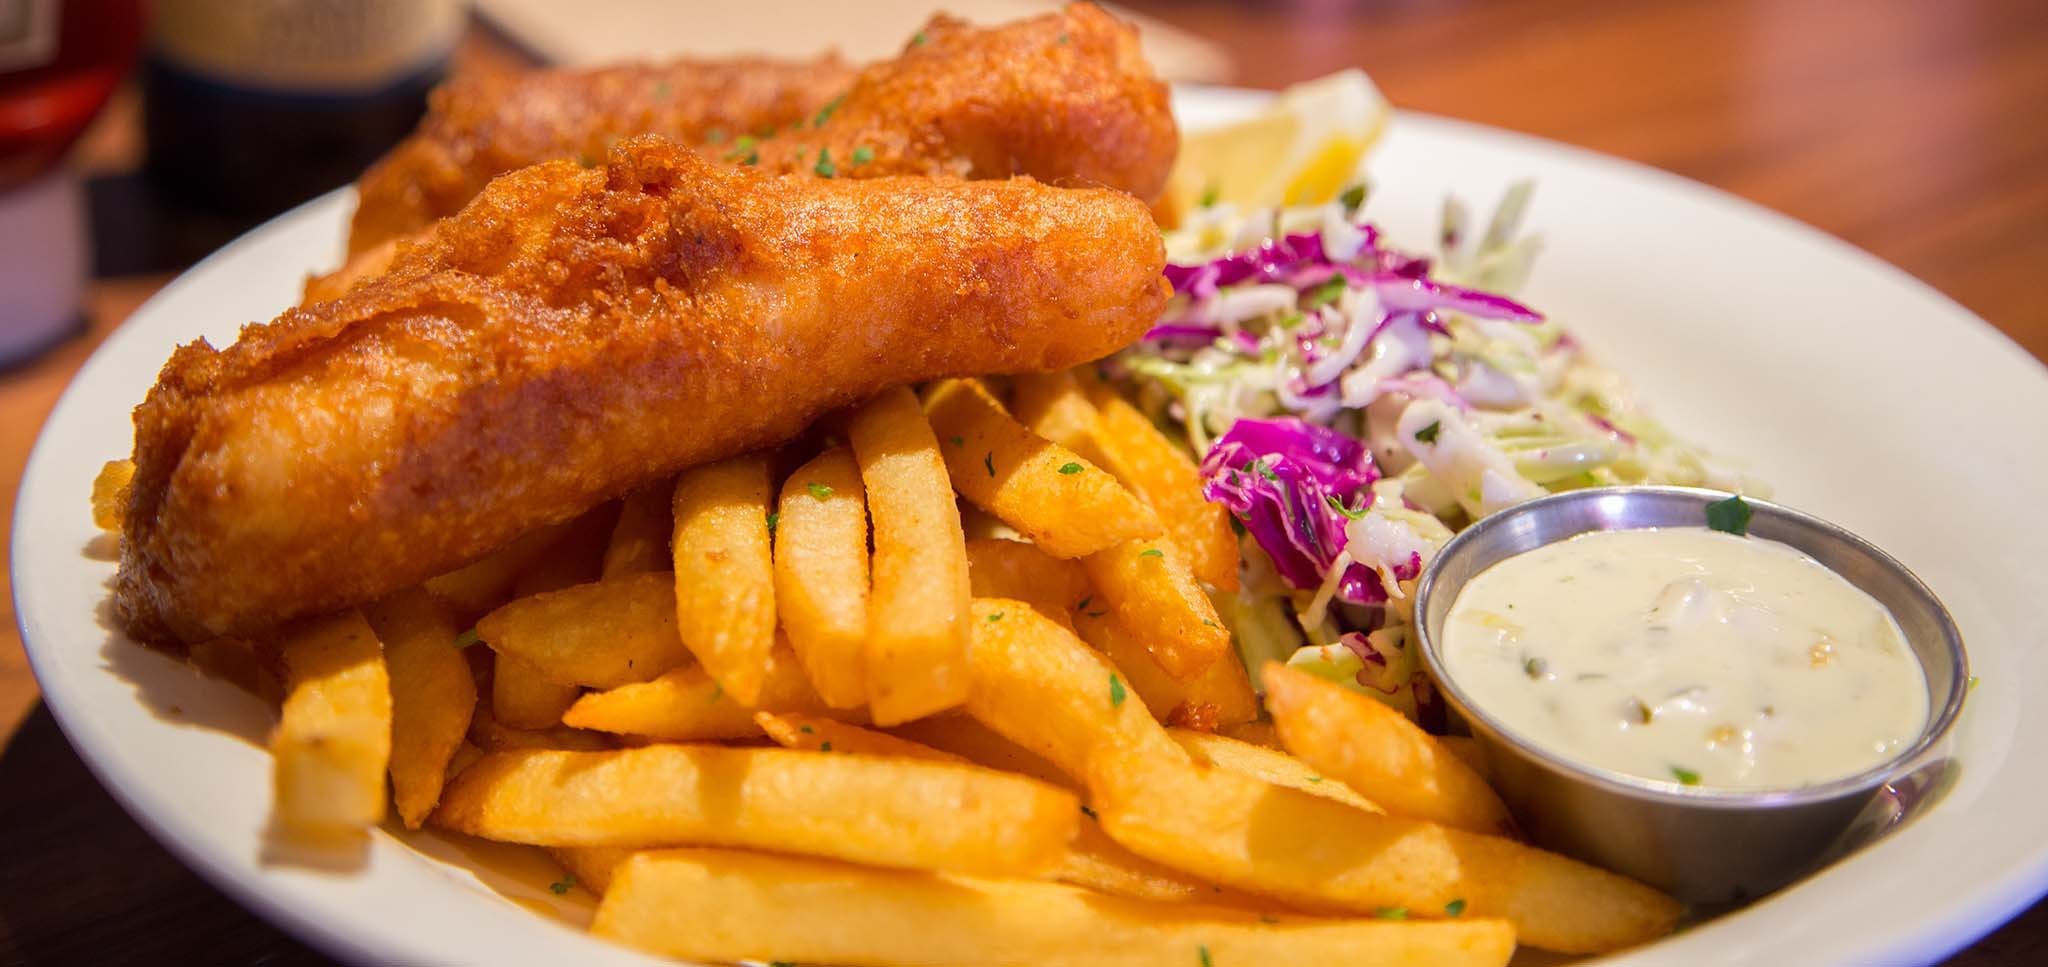 places that have fish and chips near me